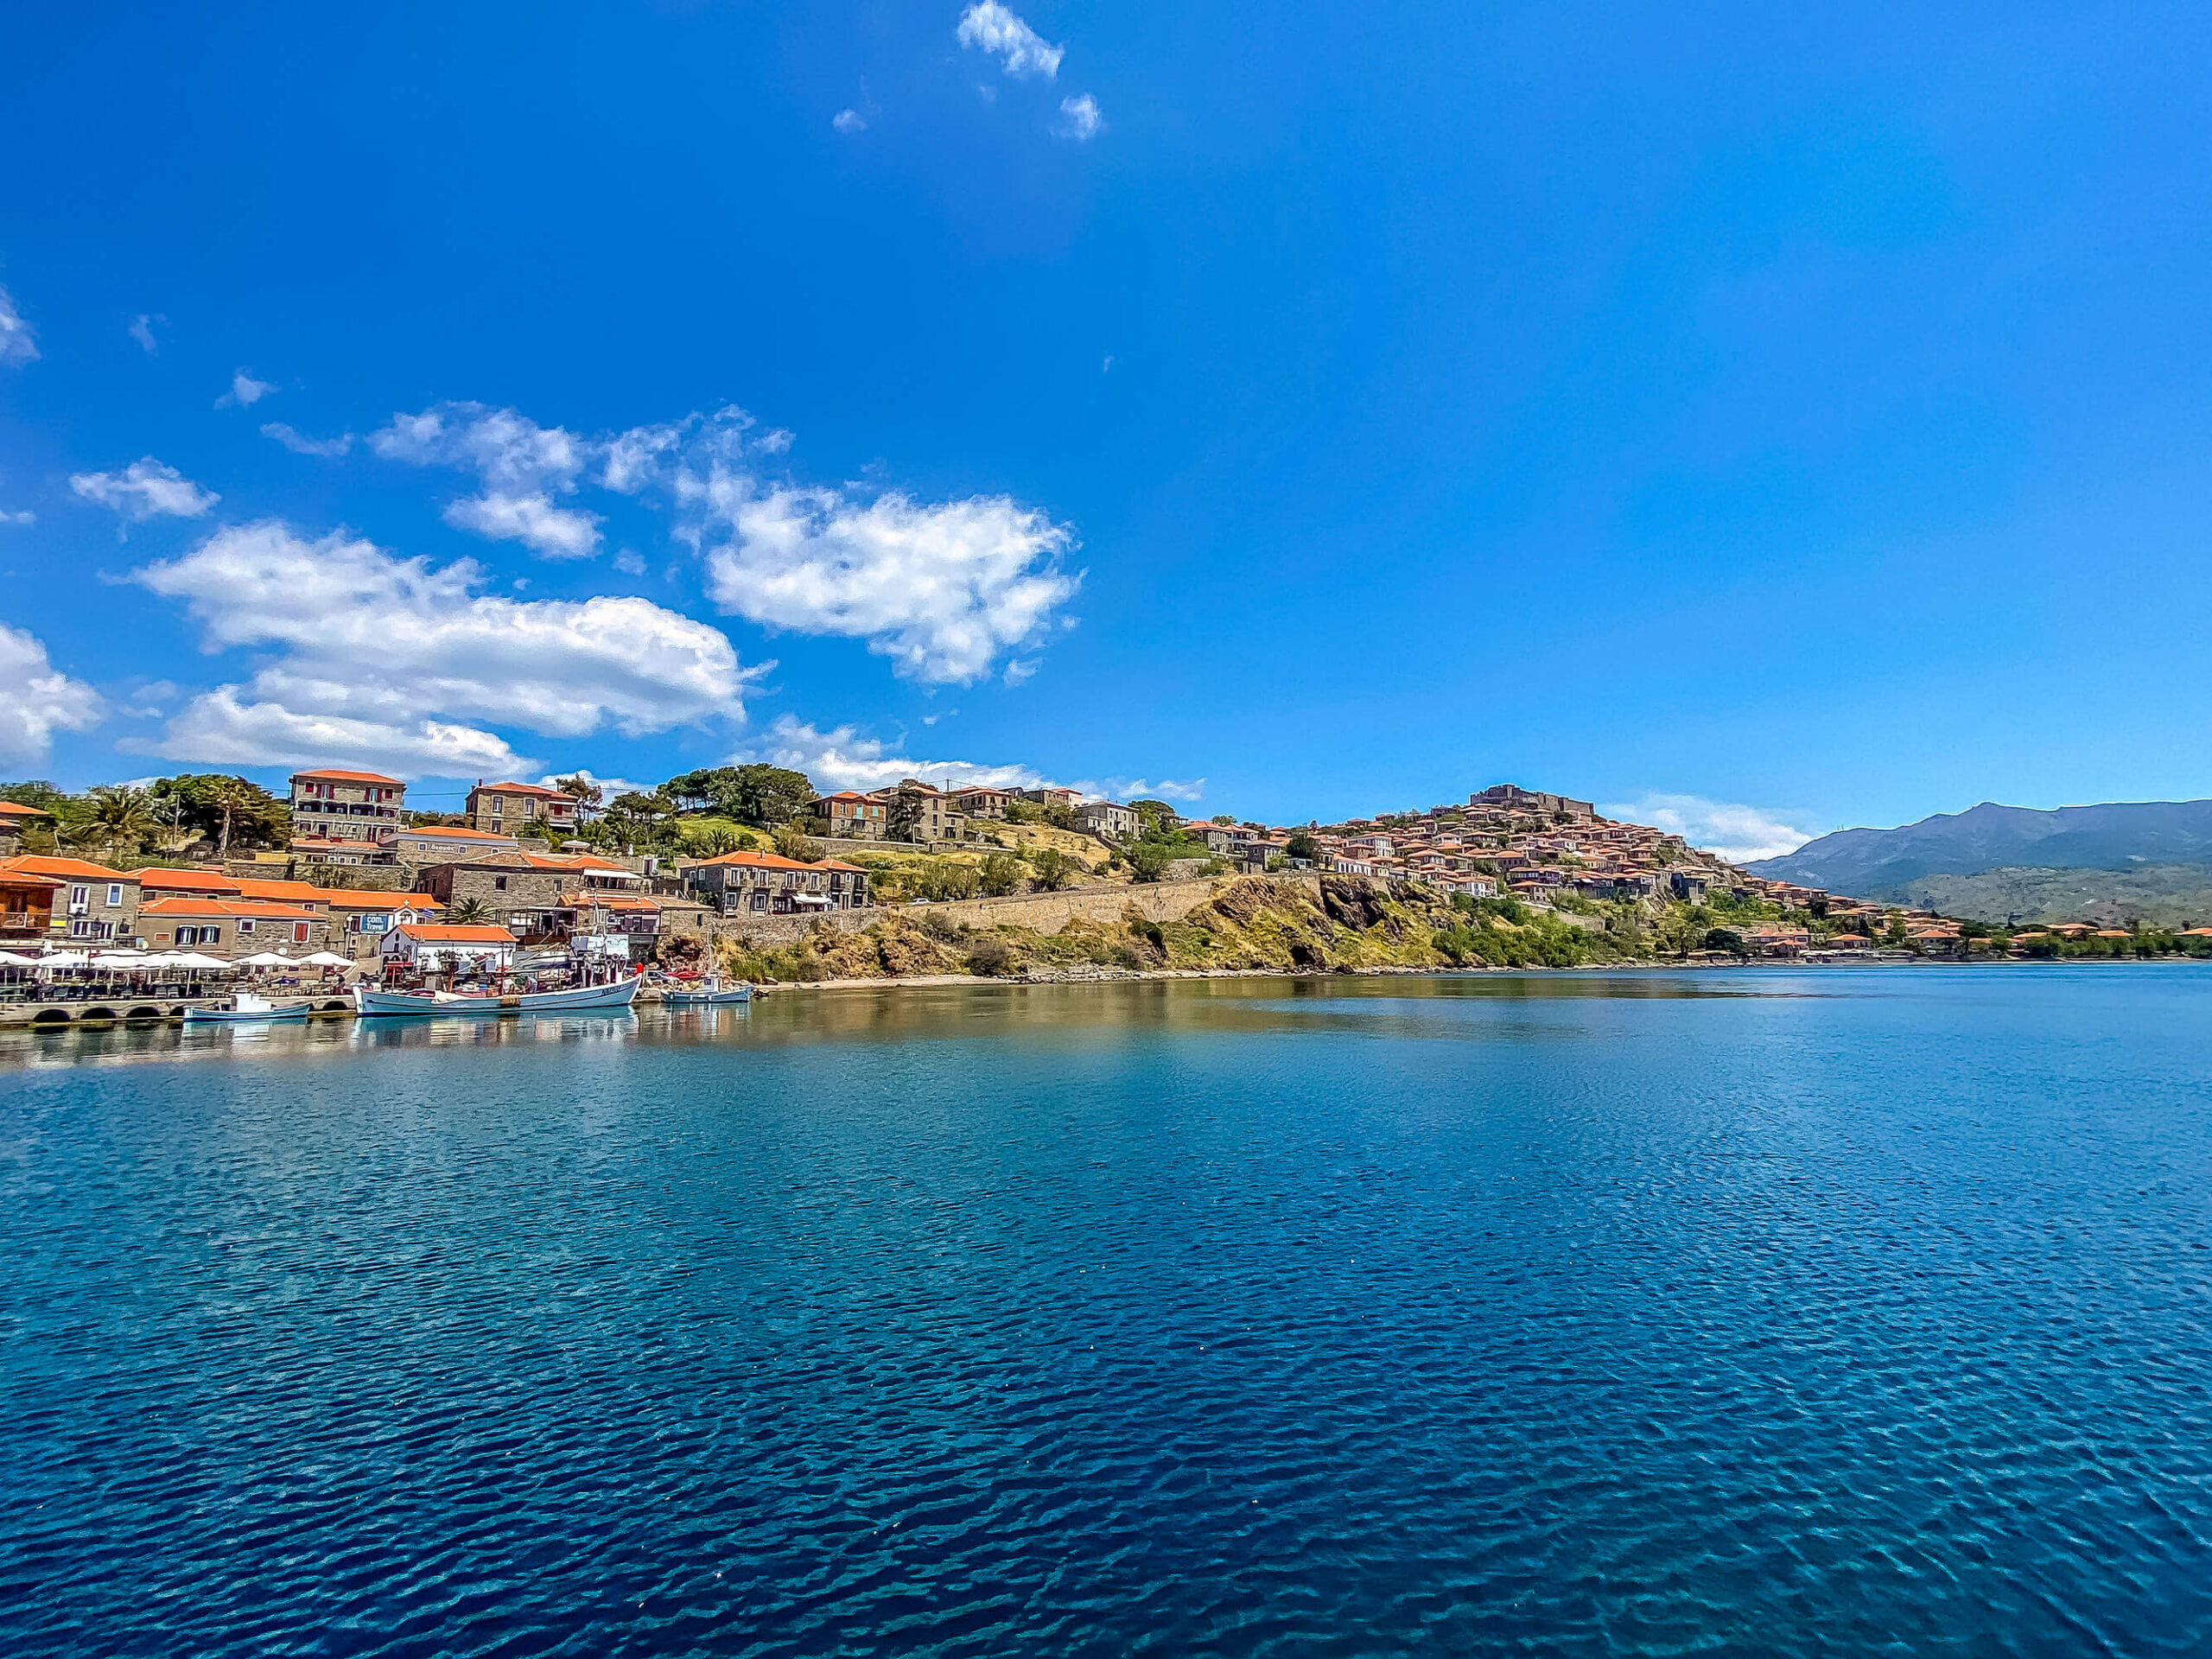 Immerse yourself in authentic Greek culture on the Greek island Lesvos